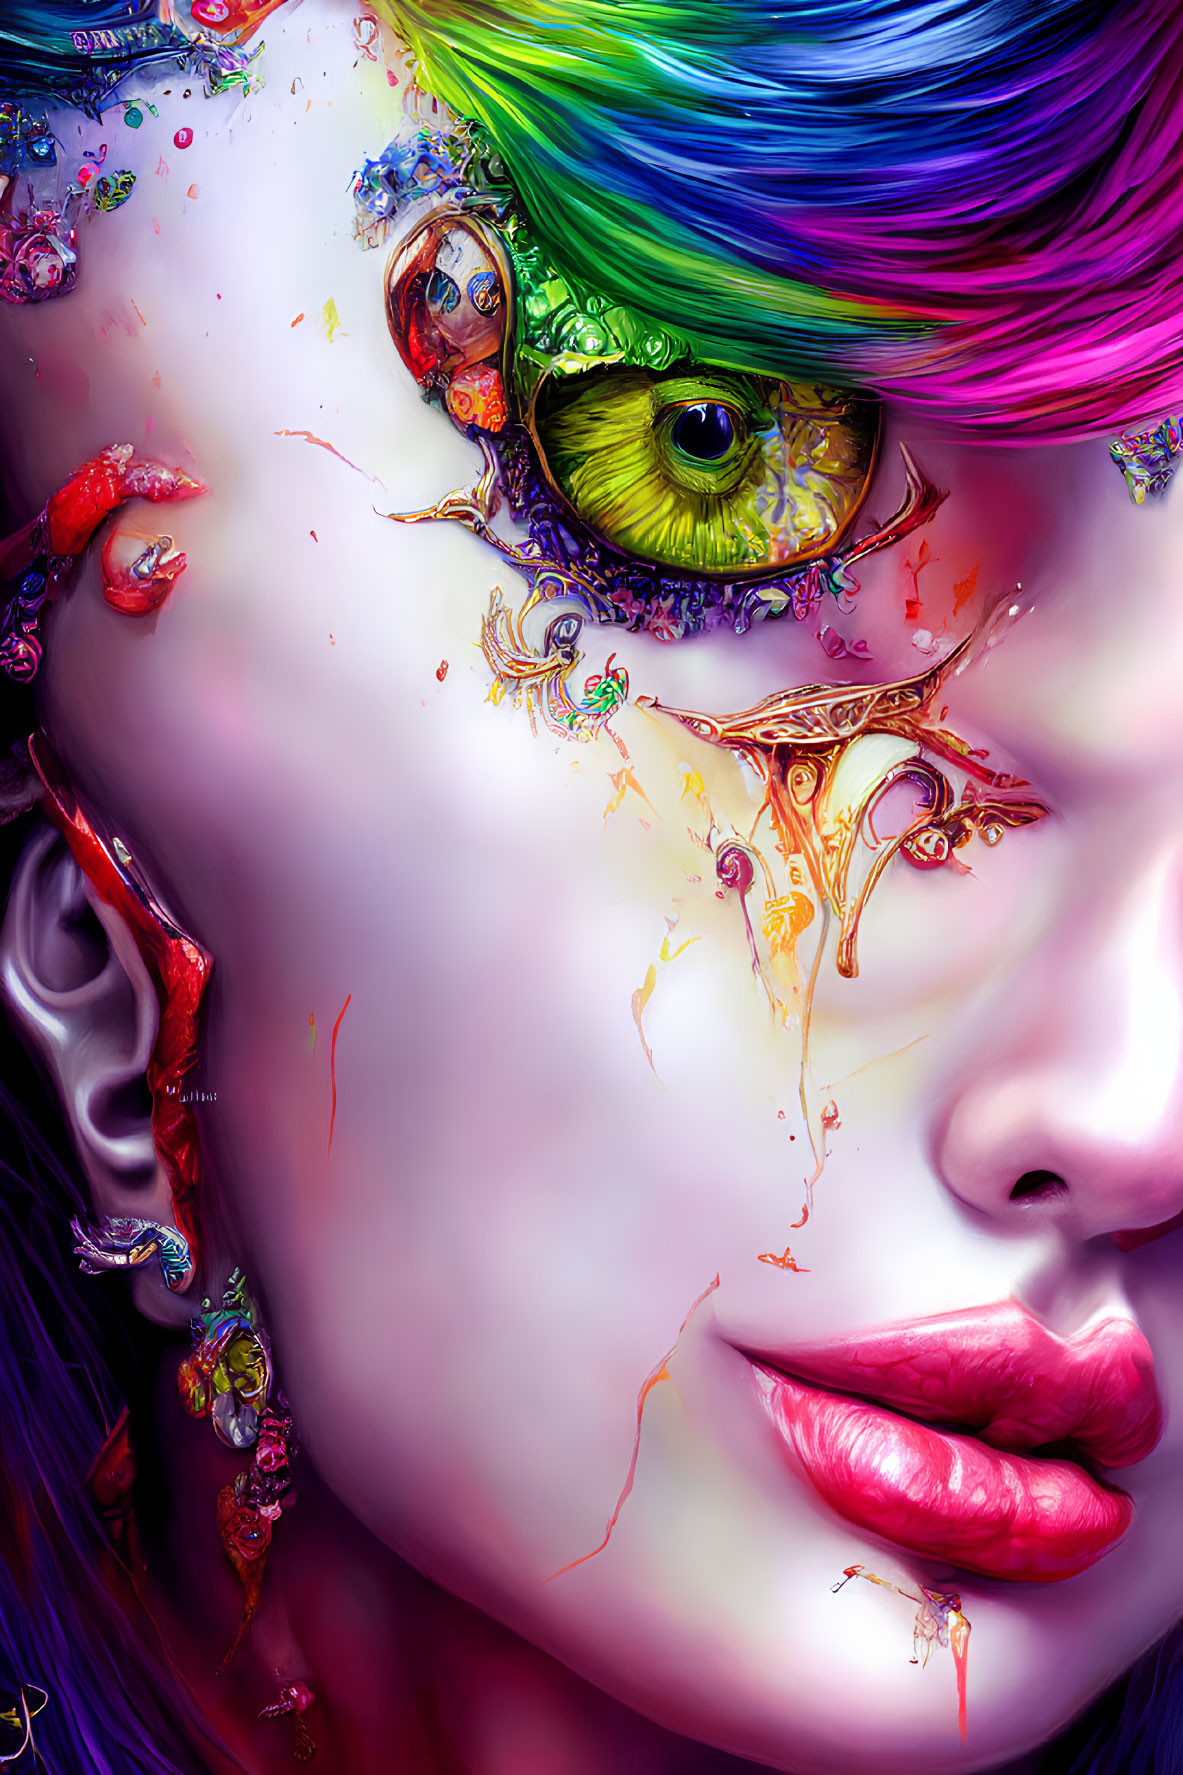 Colorful eye makeup and splattered paint effects on person's portrait